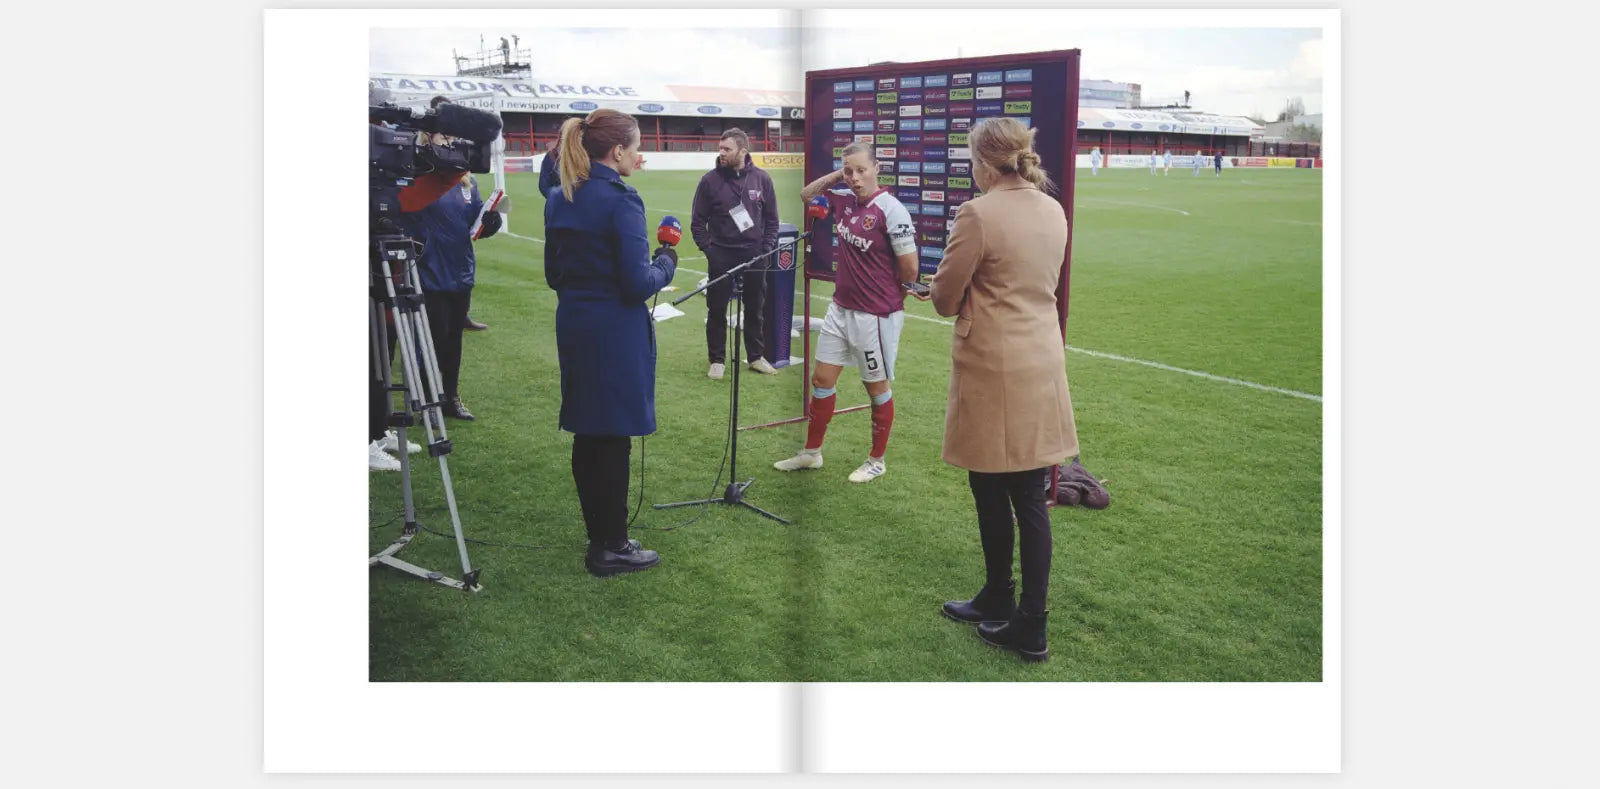 Two-page spread from the zine "Women's Football" by Claire Wray. The image shows a post-match interview on a football field. A female football player in a maroon and white uniform stands in front of a media backdrop, speaking into microphones held by two female reporters. One reporter wears a blue coat, and the other wears a tan coat. A cameraman films the scene while another person looks on. The setting is a stadium with green grass and stands in the background.